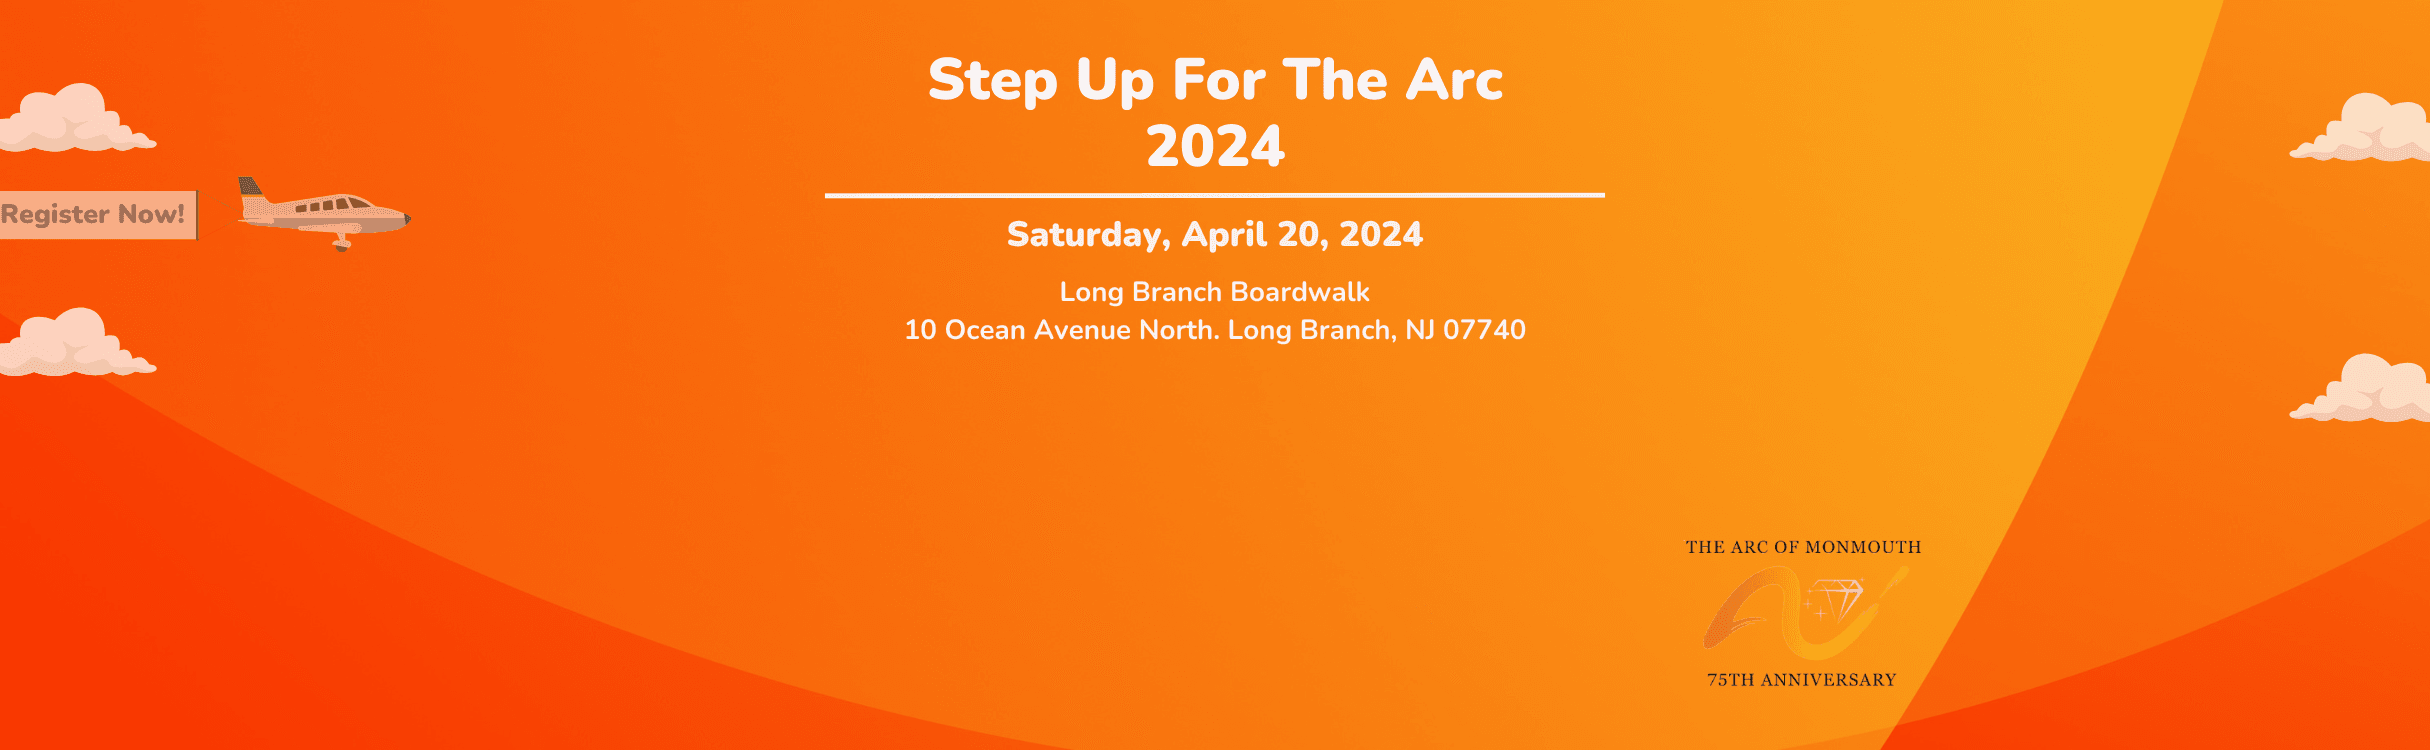 Step Up for The Arc 2024